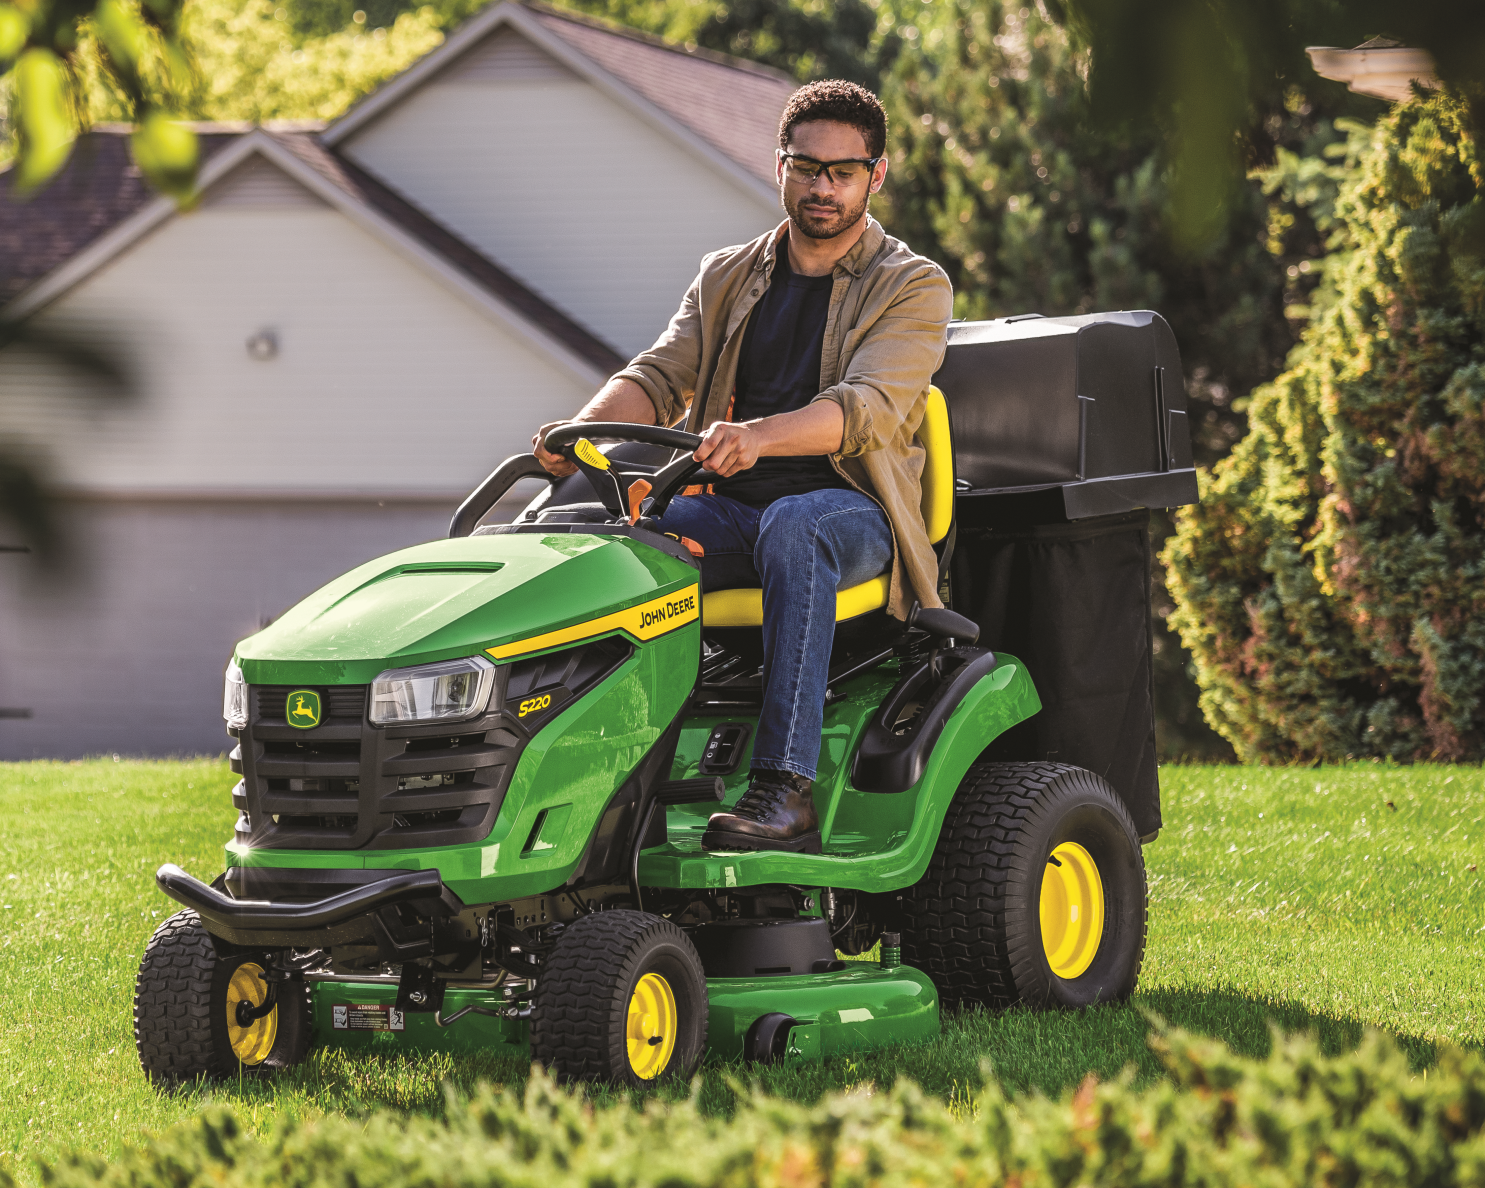 A worker is riding on a John Deere S220 Lawn Tractor